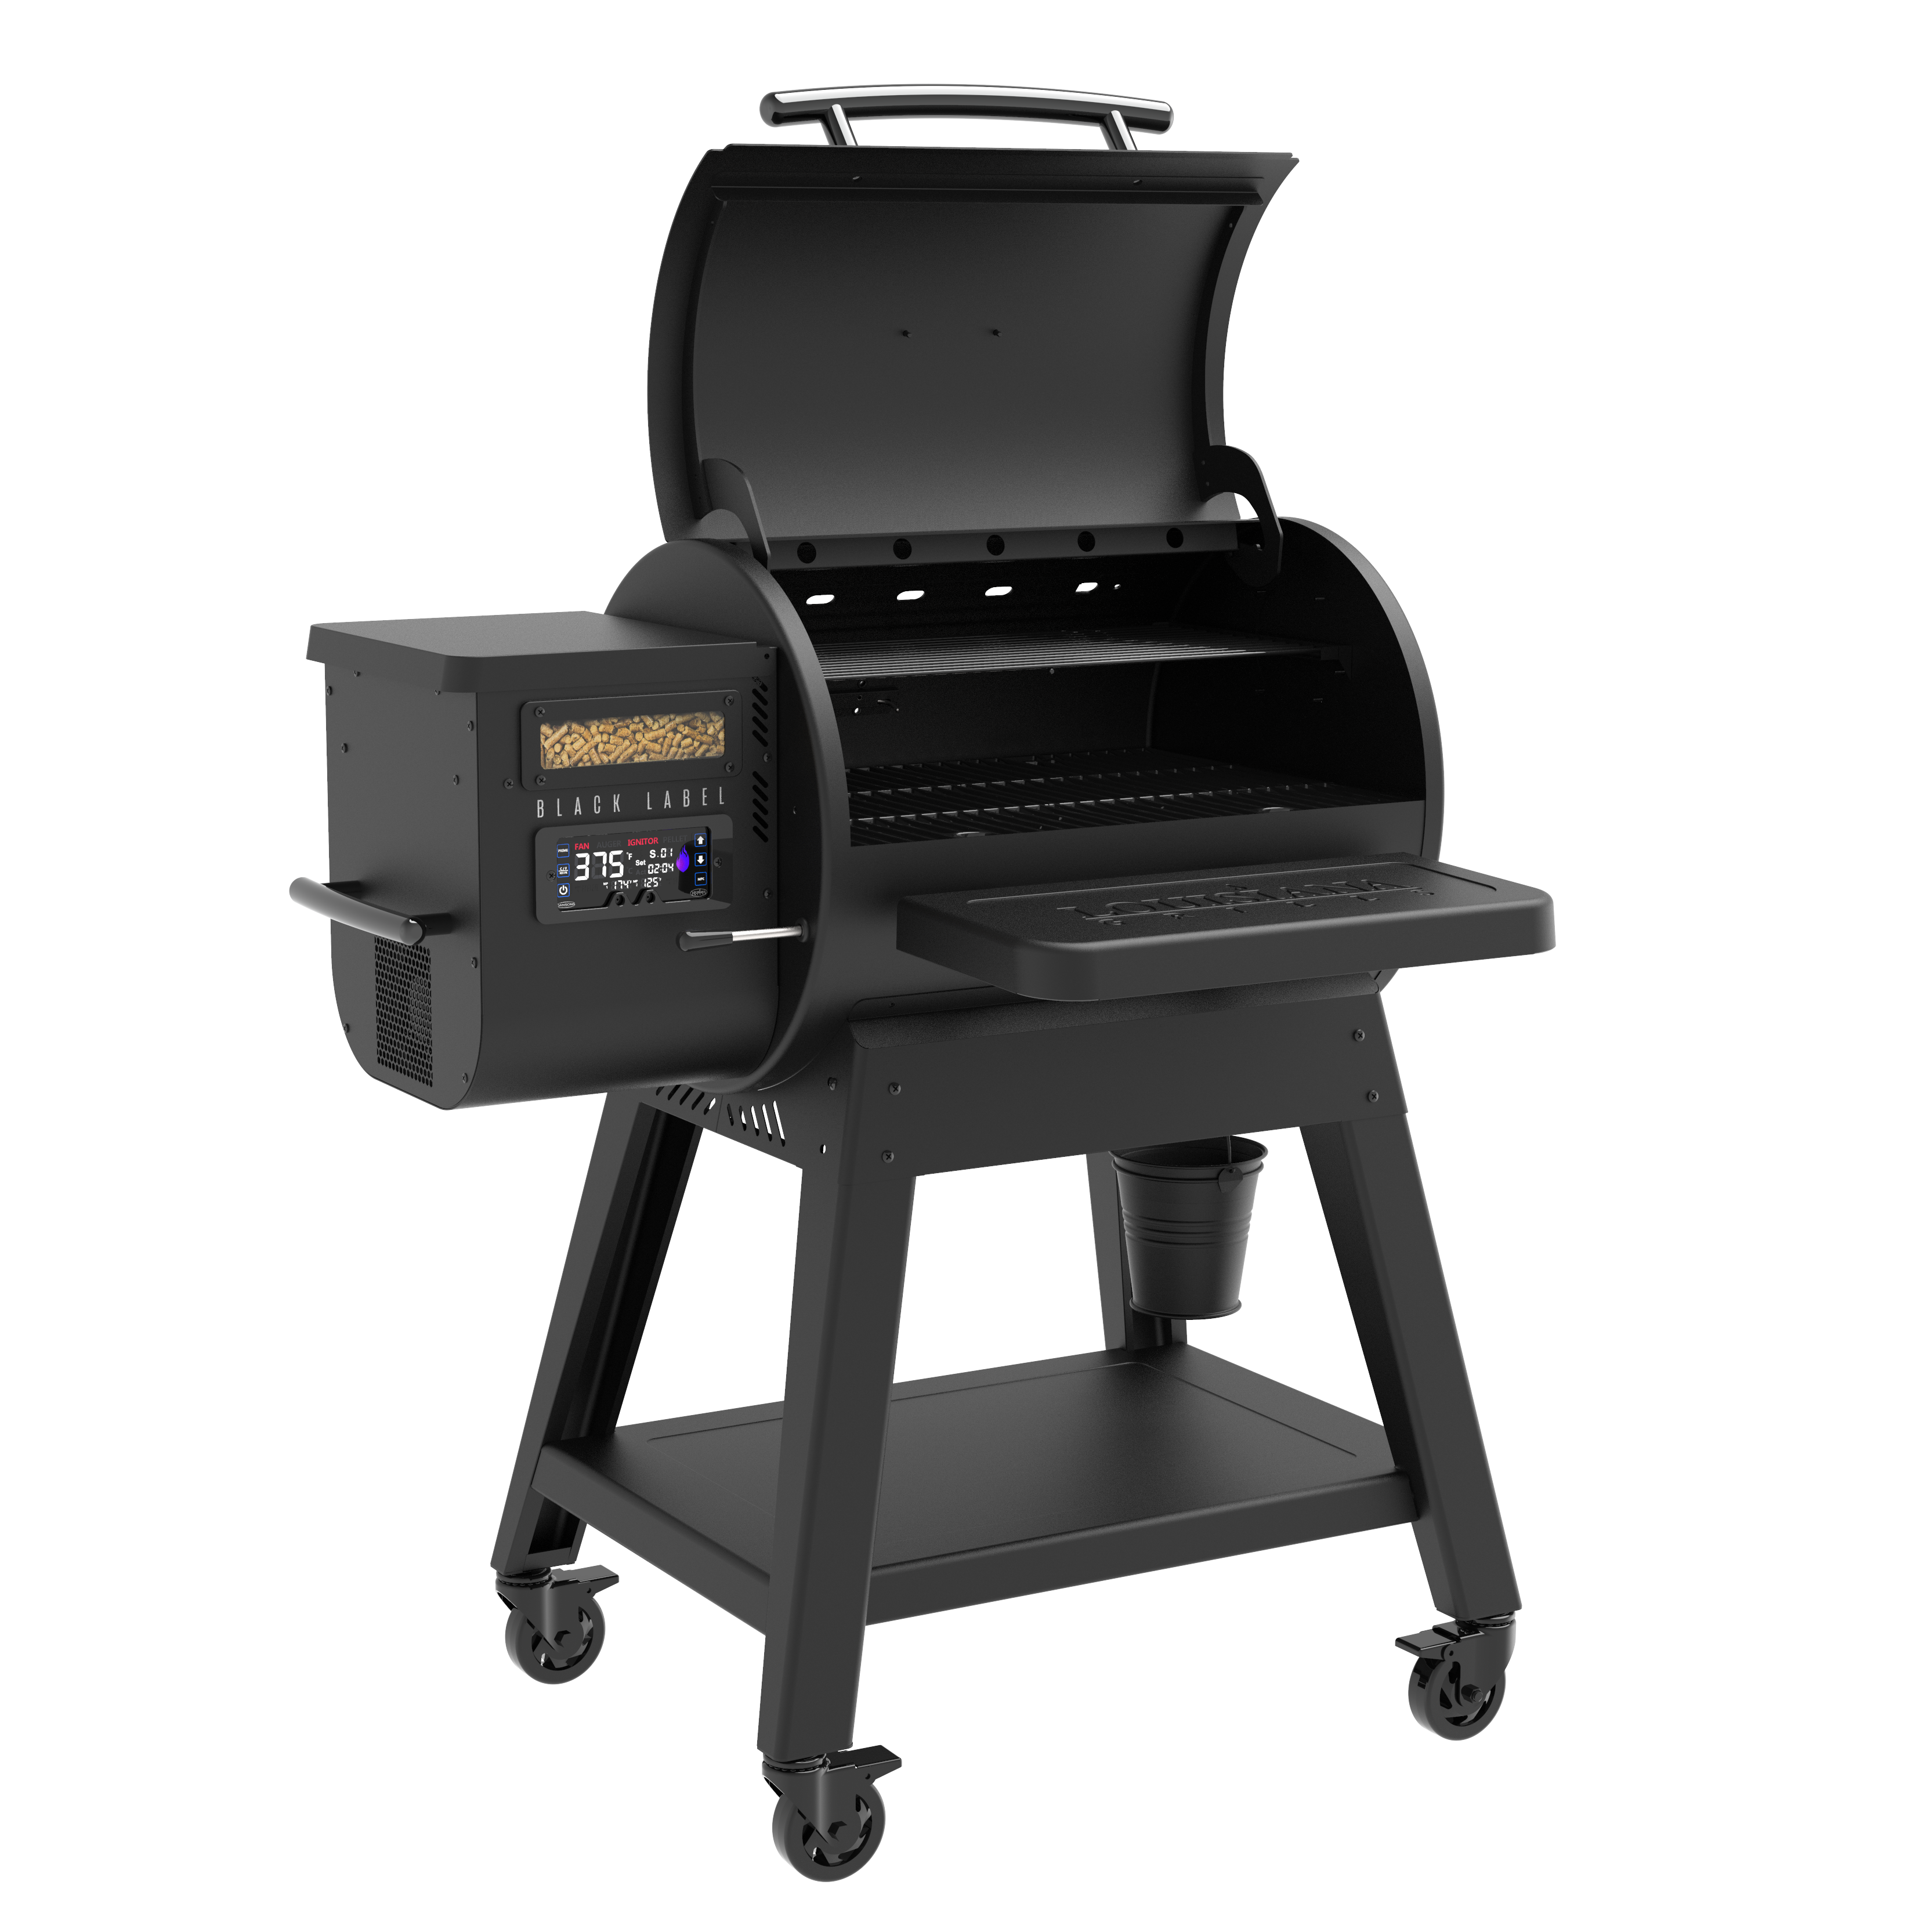 Black Label 800 Wood Pellet Grill & Smoker by Louisiana Grills - LG800BL - CLEARANCE (Store Pick Up ONLY!)